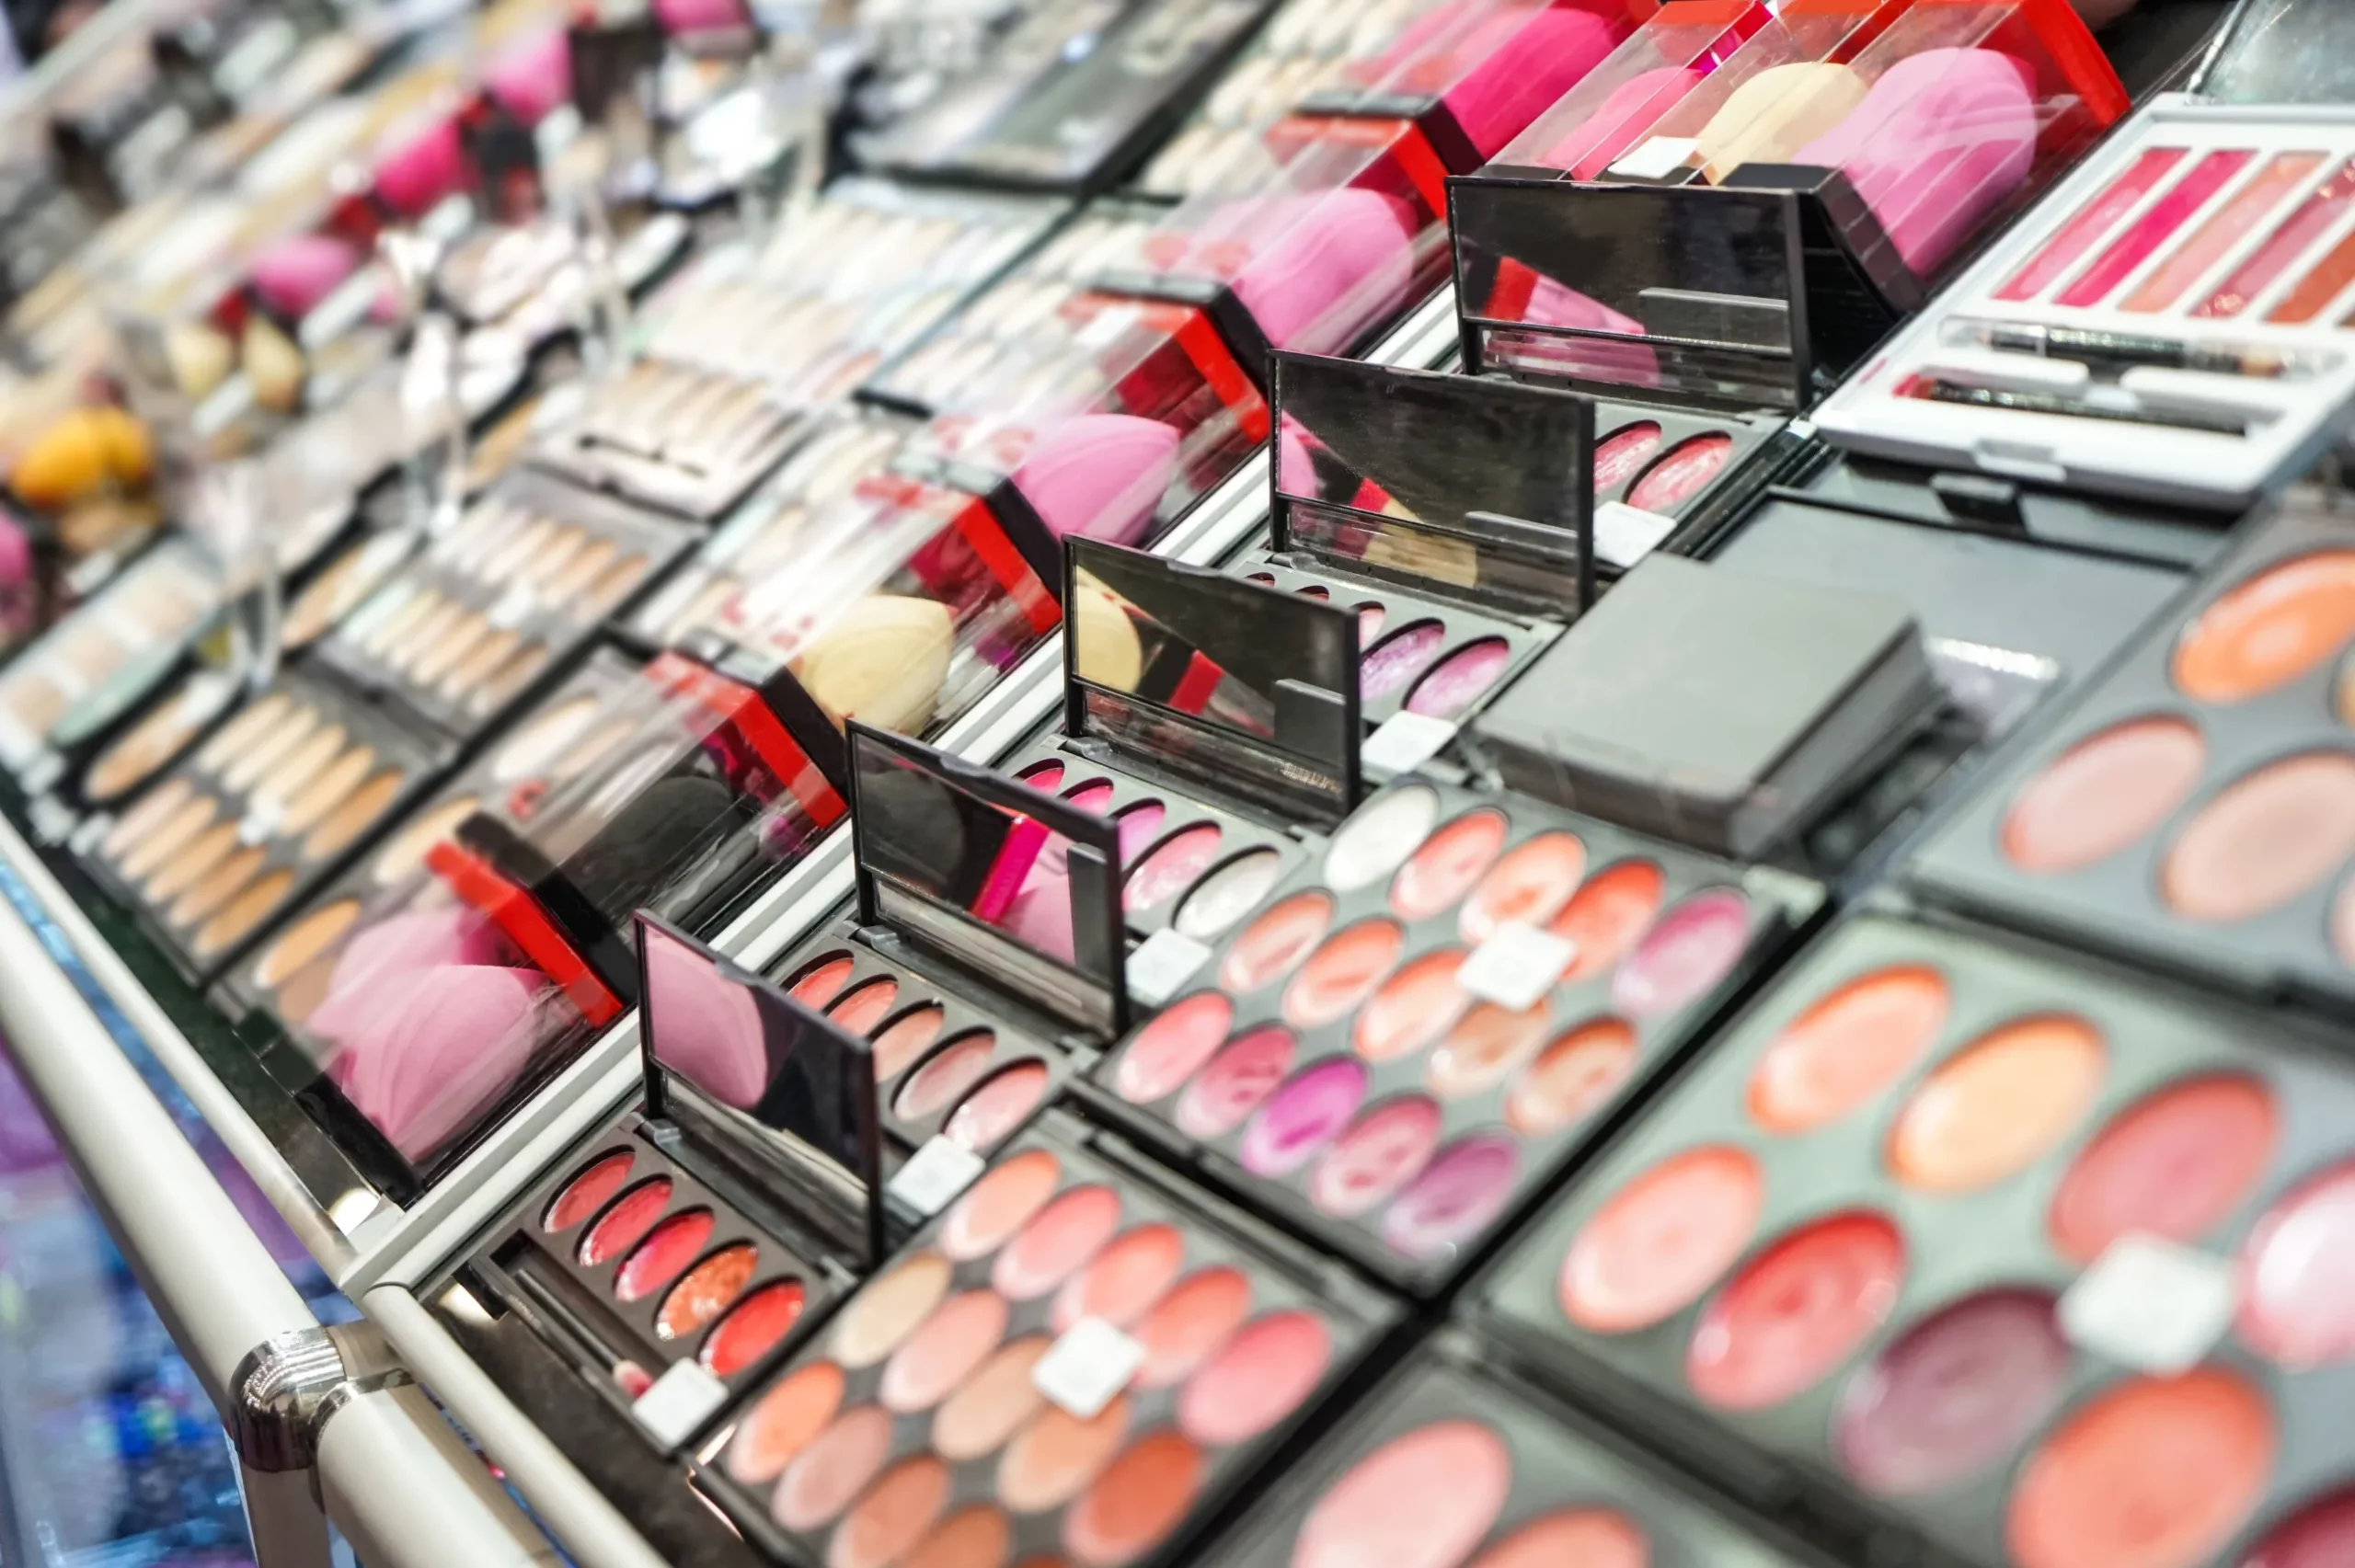 FDA updates cosmetics regulations to focus on ‘serious adverse effects’